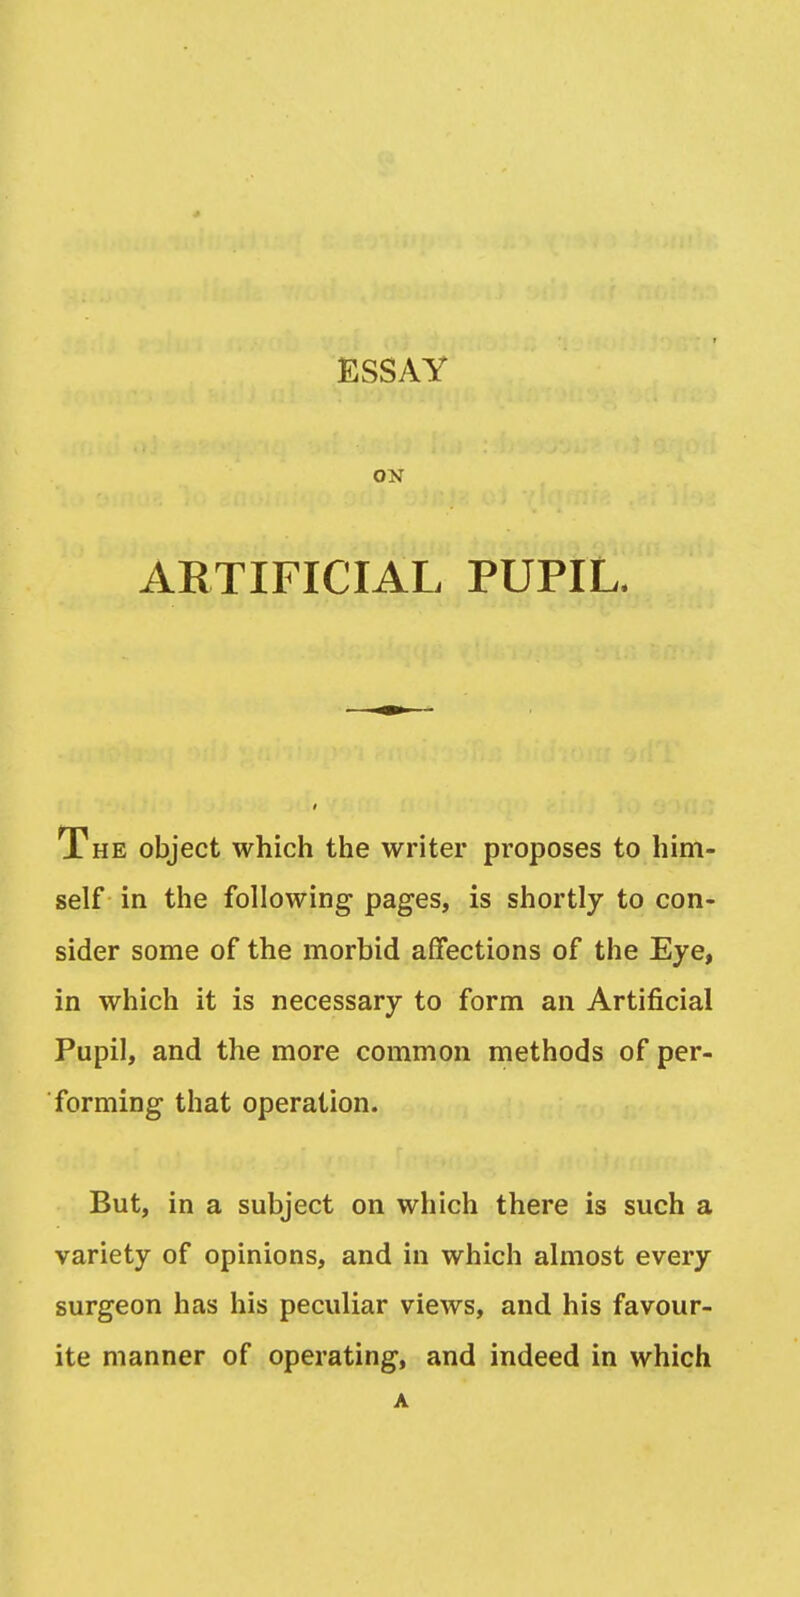 ESSAY ON ARTIFICIAL PUPIL. The object which the writer proposes to him- self in the following pages, is shortly to con- sider some of the morbid affections of the Eye, in which it is necessary to form an Artificial Pupil, and the more common methods of per- forming that operation. But, in a subject on which there is such a variety of opinions, and in which almost every surgeon has his peculiar views, and his favour- ite manner of operating, and indeed in which A